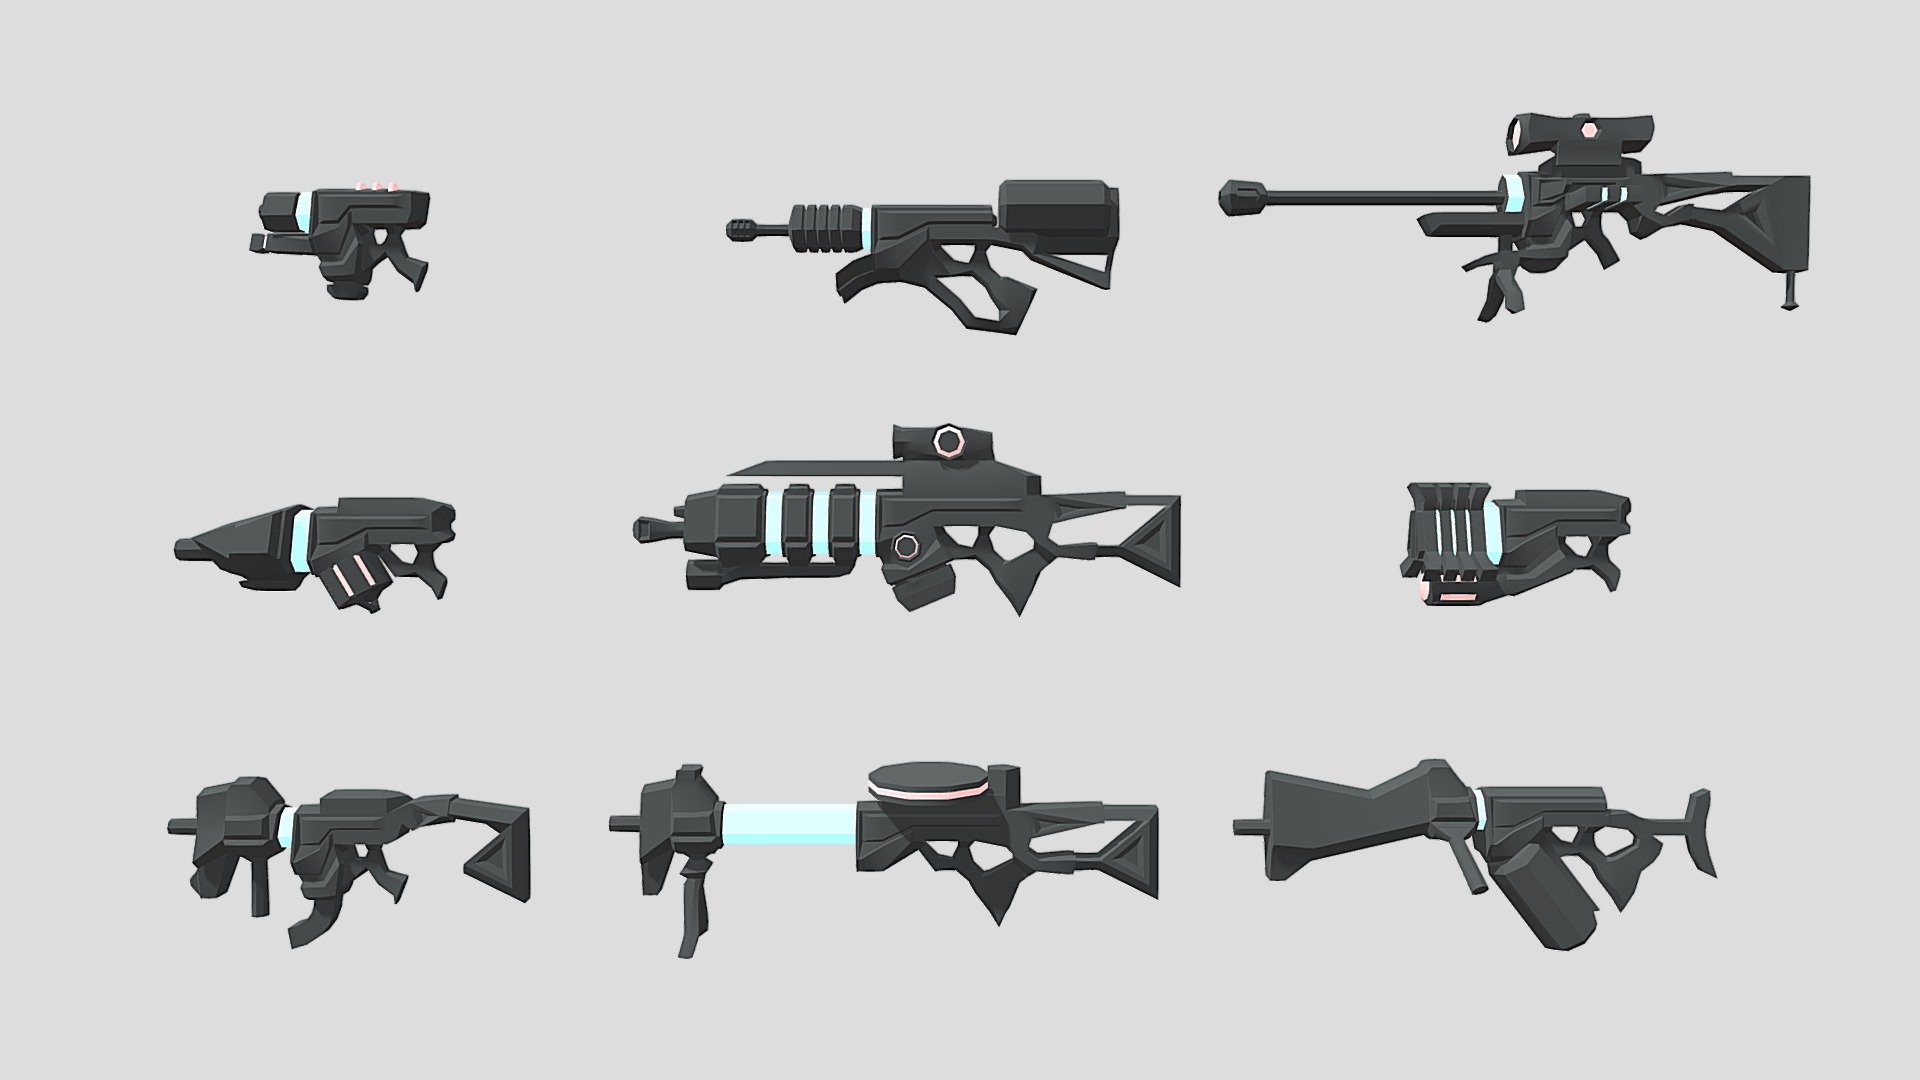 I made some lowpoly guns a while ago as I'm starting to lean more towards low poly assets for games.

I made the assault rifle first and then morphed all the other guns from it in a progressive way, mostly building upon some of the new designs as well to get other guns.

I watched an Imphenzia youtube tutorial about making a low poly sci-fi gun. This was my end result 3d model